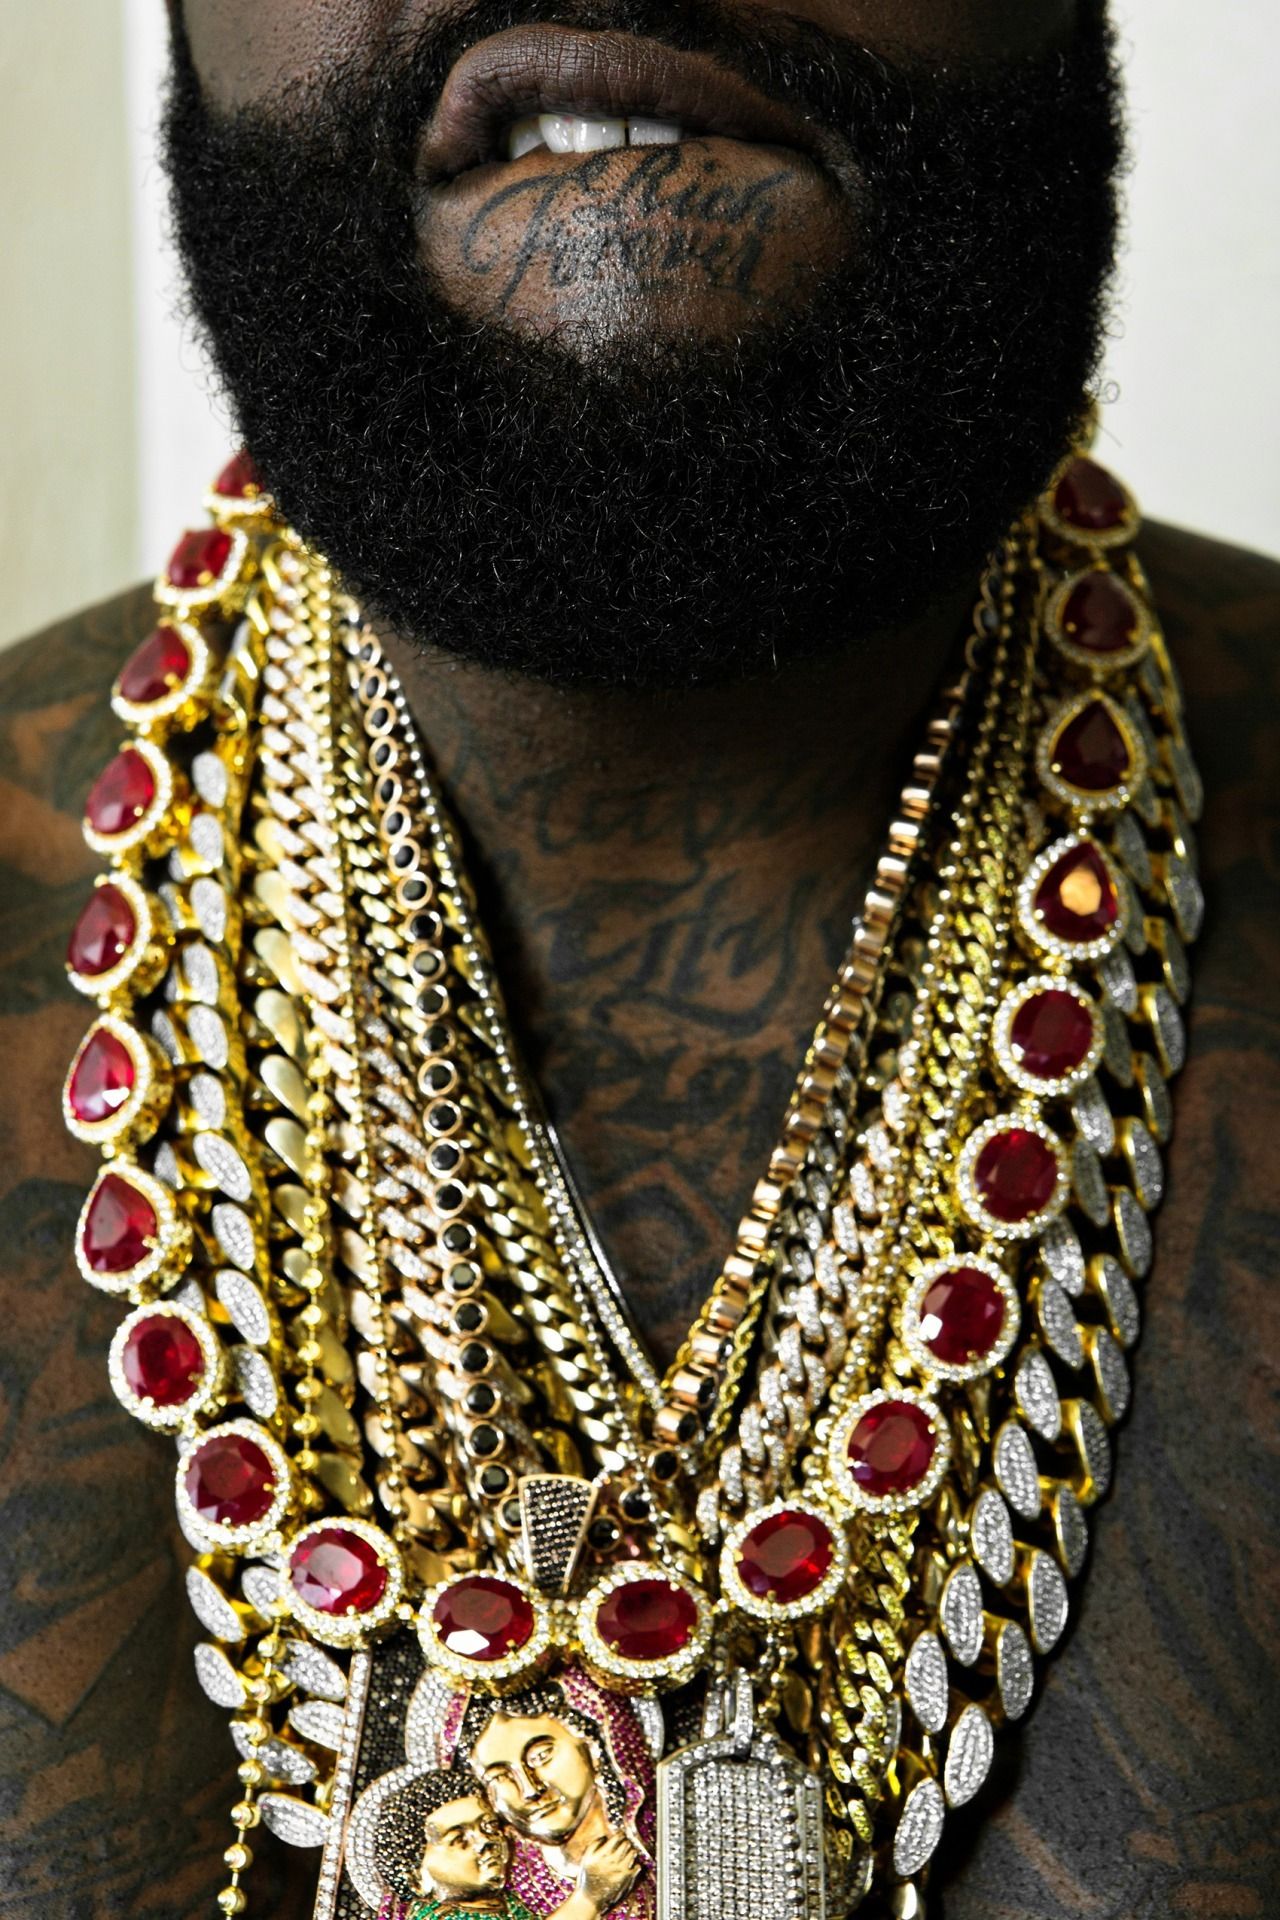 Too Much Cocaine, Not Enough Pears On Rick Ross' 'Hood